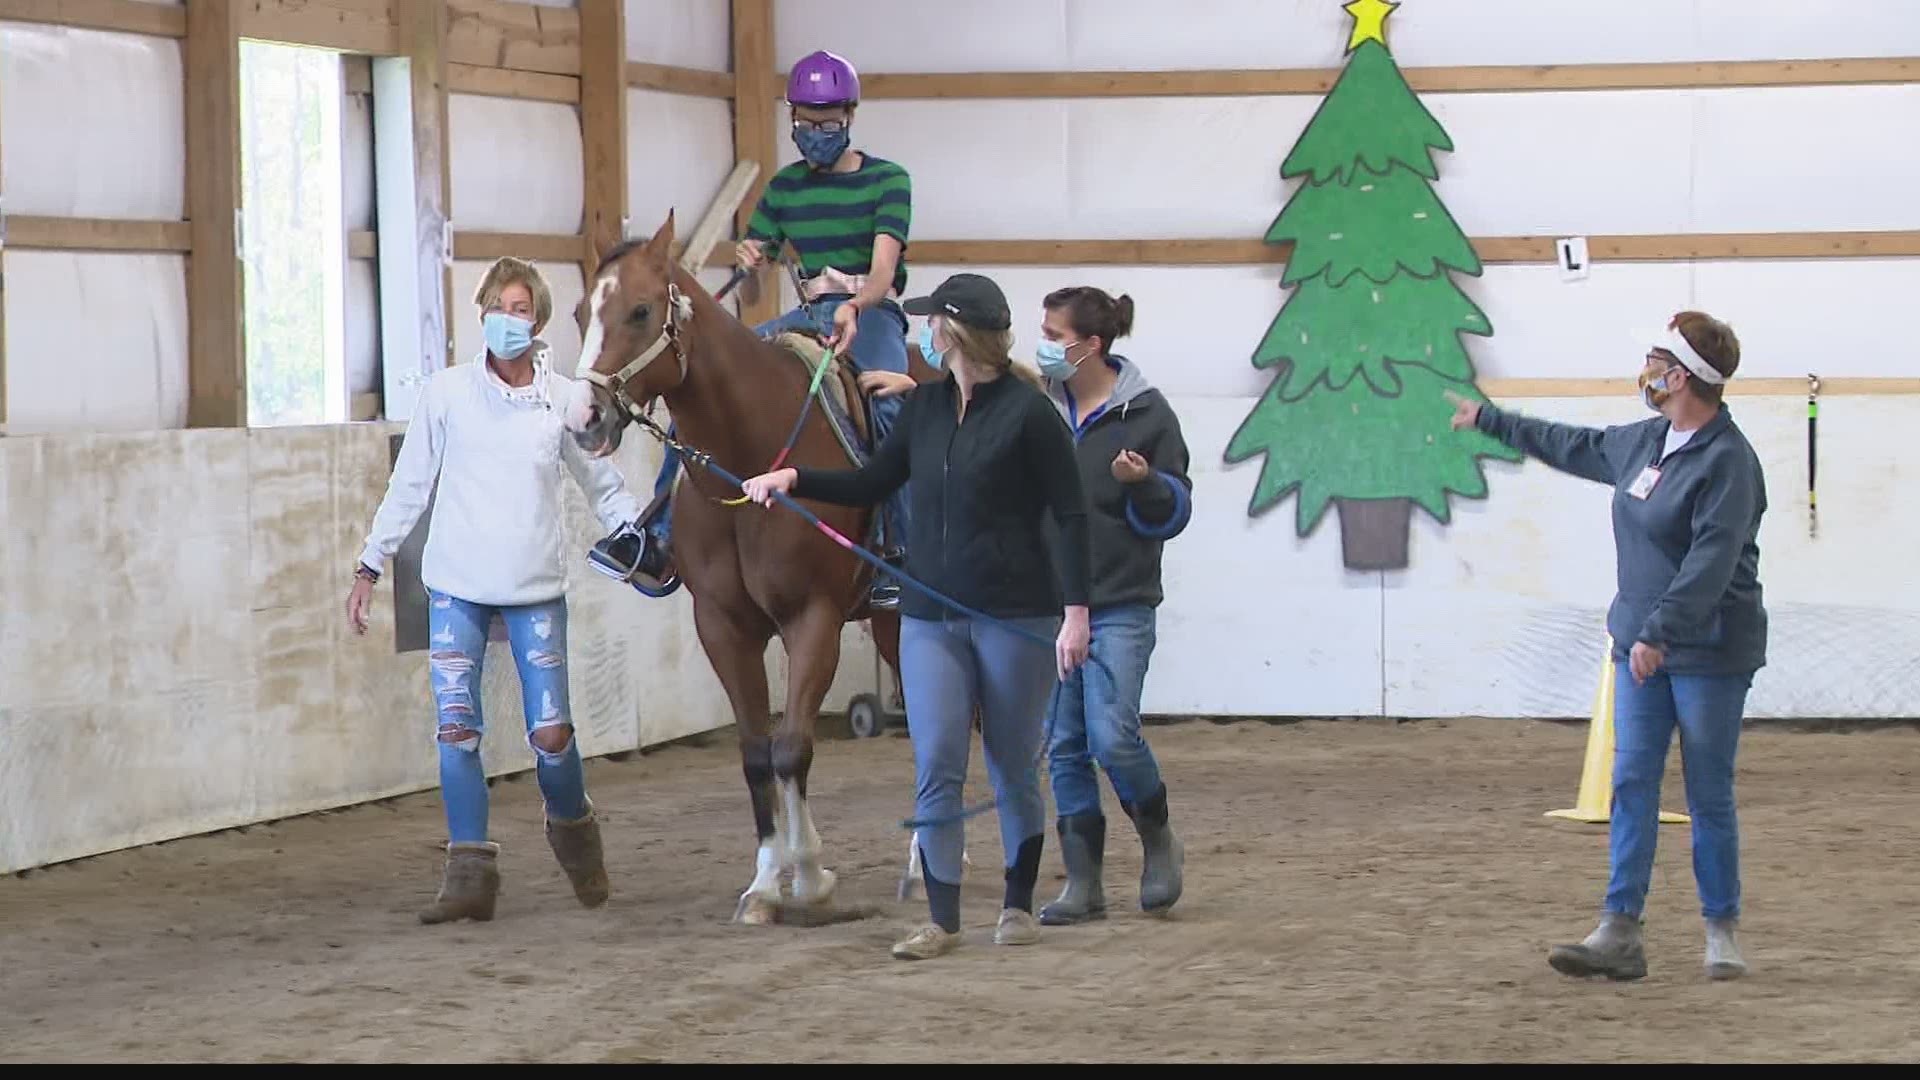 The Breeders Crown Charity Challenge is benefiting four nonprofit organizations represented by local Indiana celebrities, including 13Sunrise anchor Julia Moffitt.